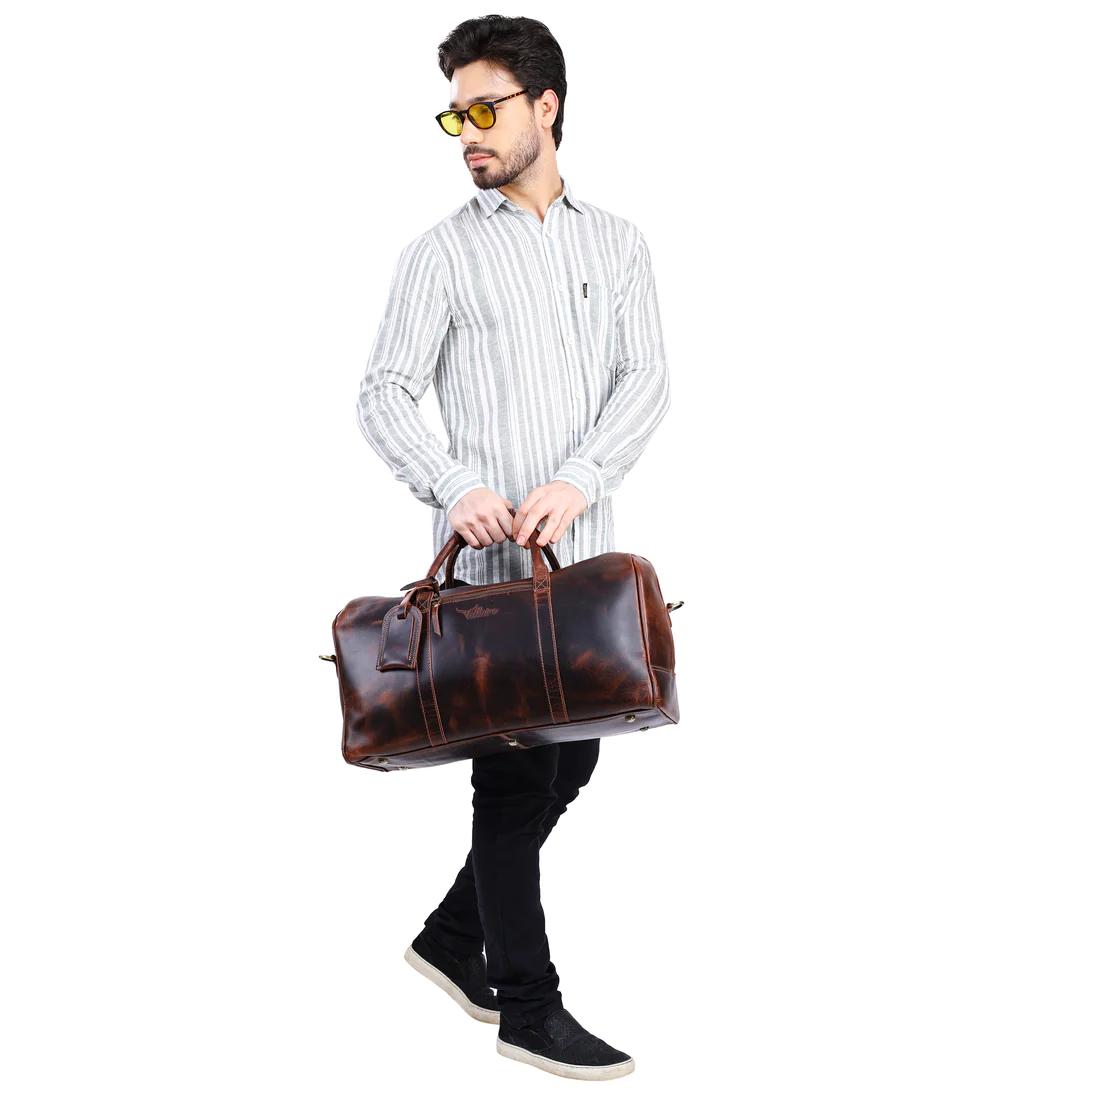 Load image into Gallery viewer, Leather Weekender Duffle Bag | Light Brown
